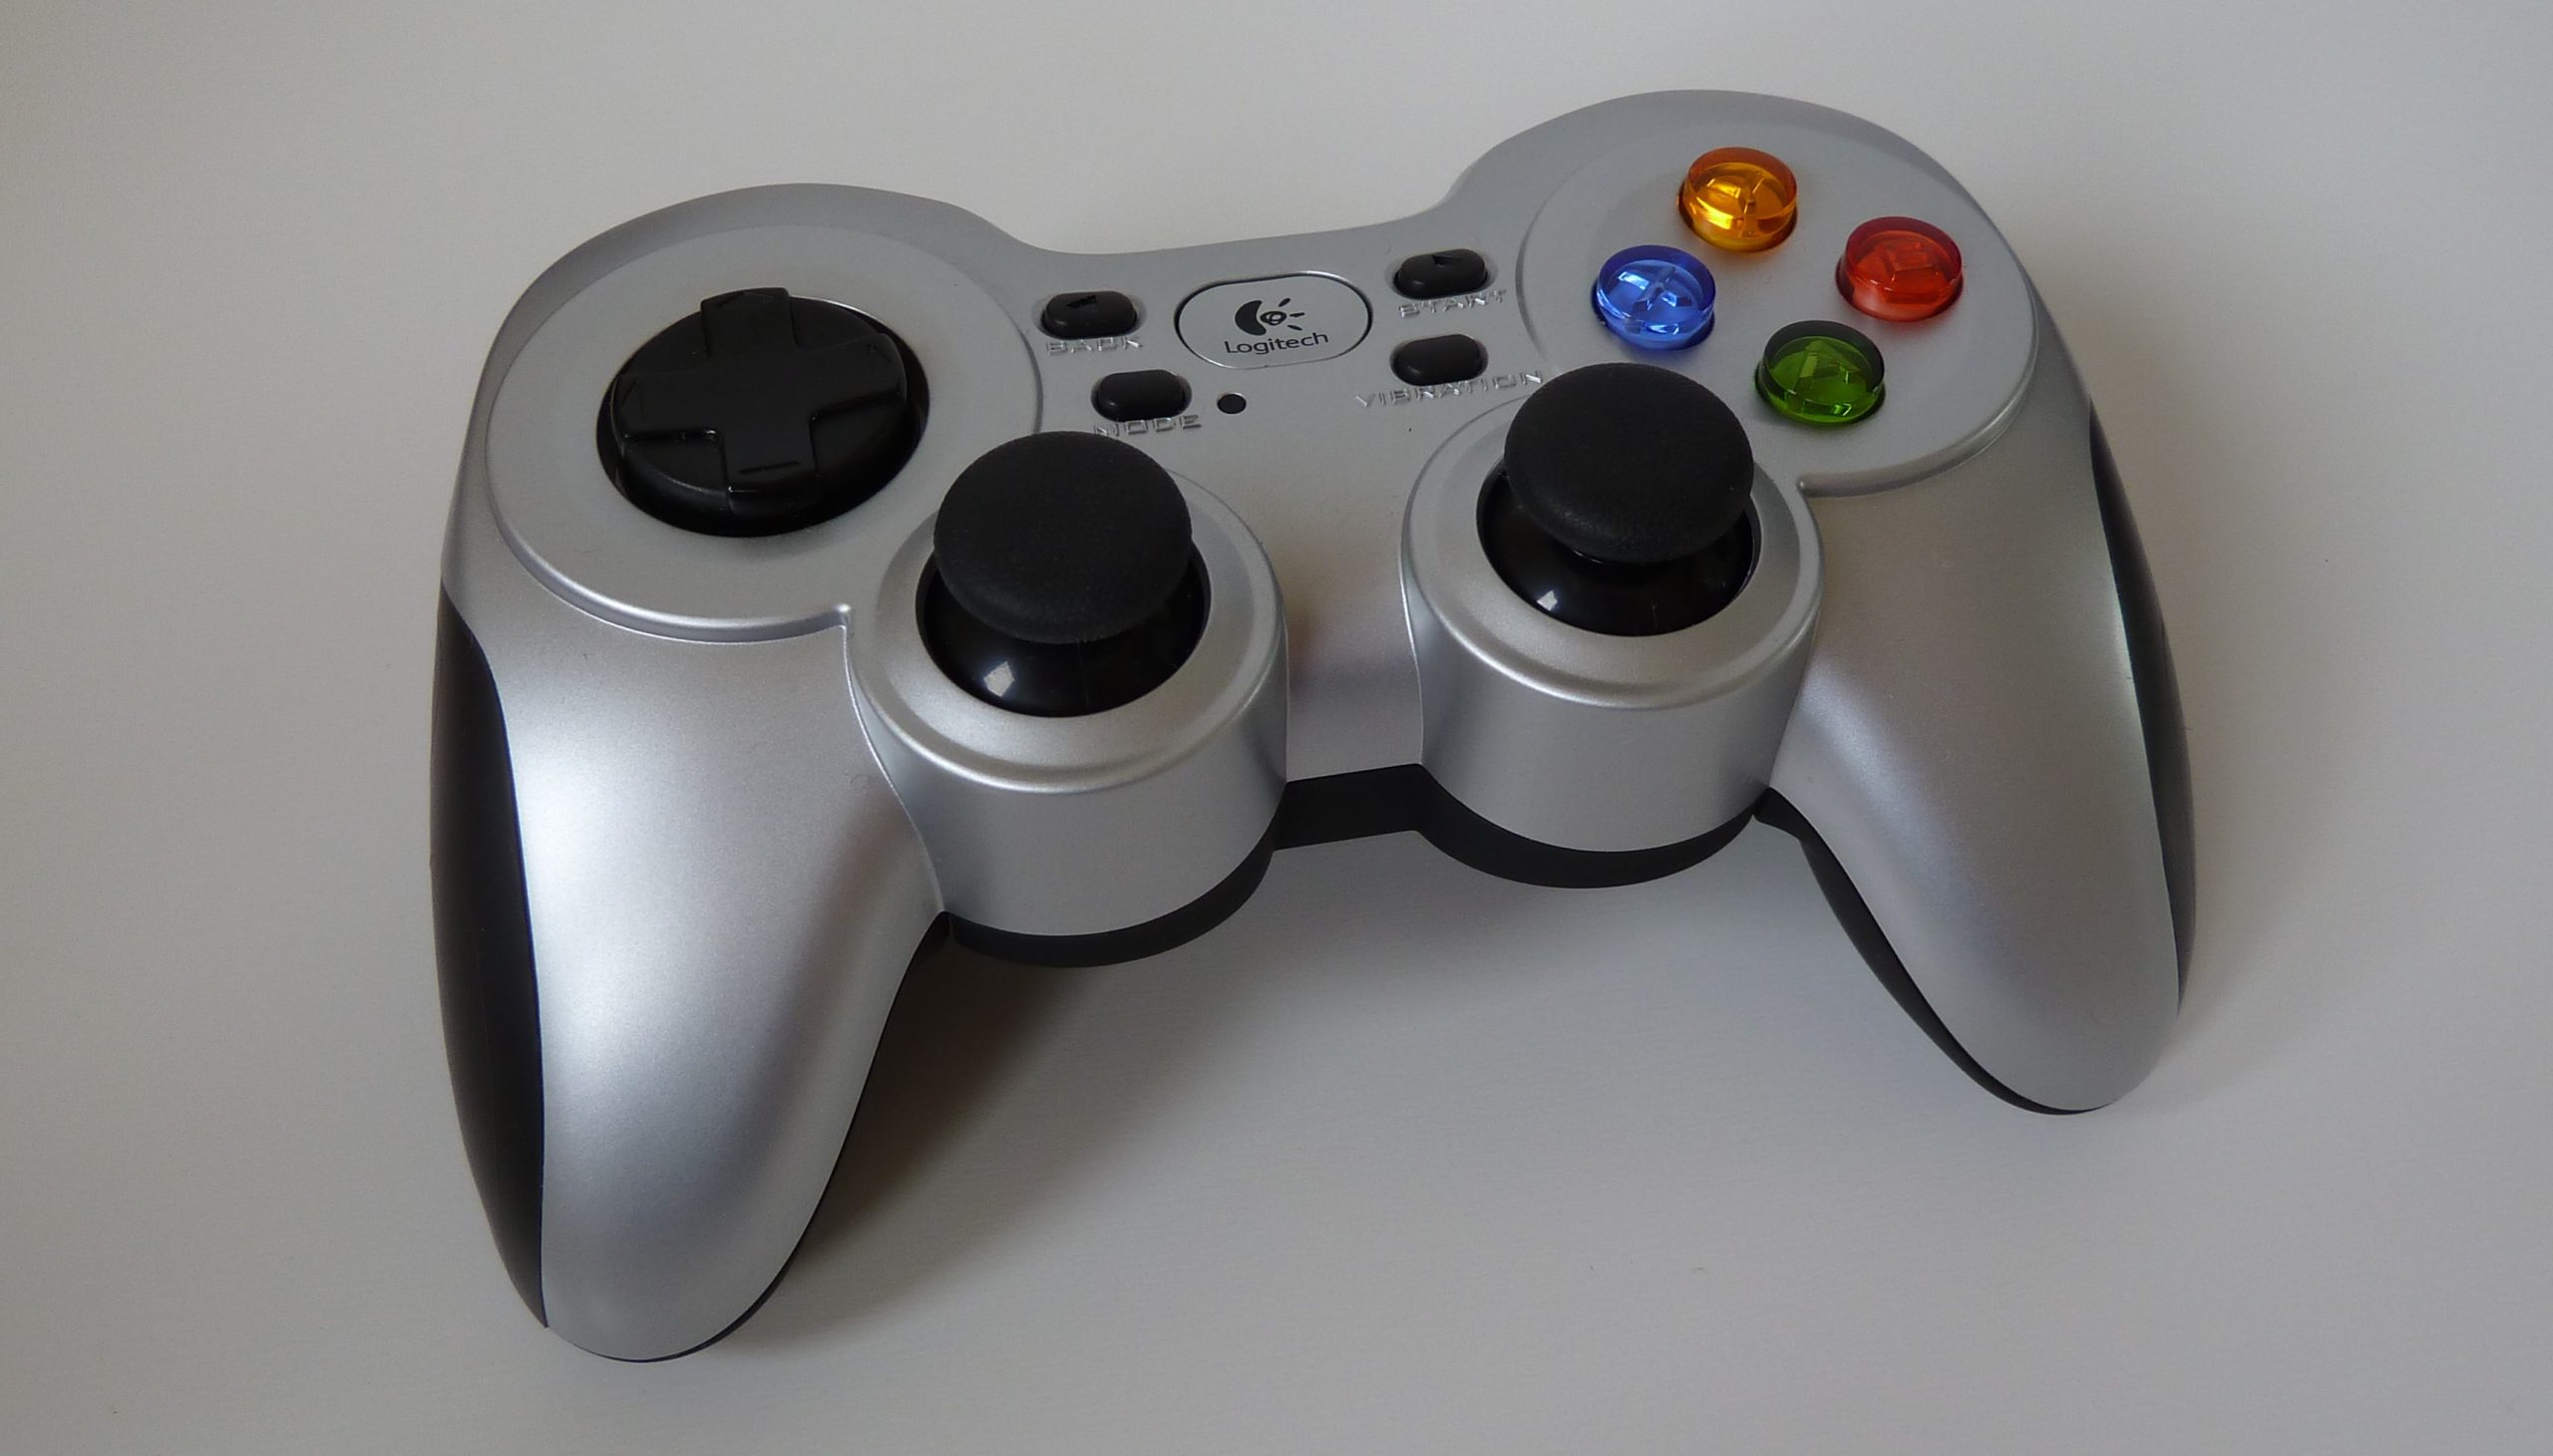 xpad with xbox 360 controller